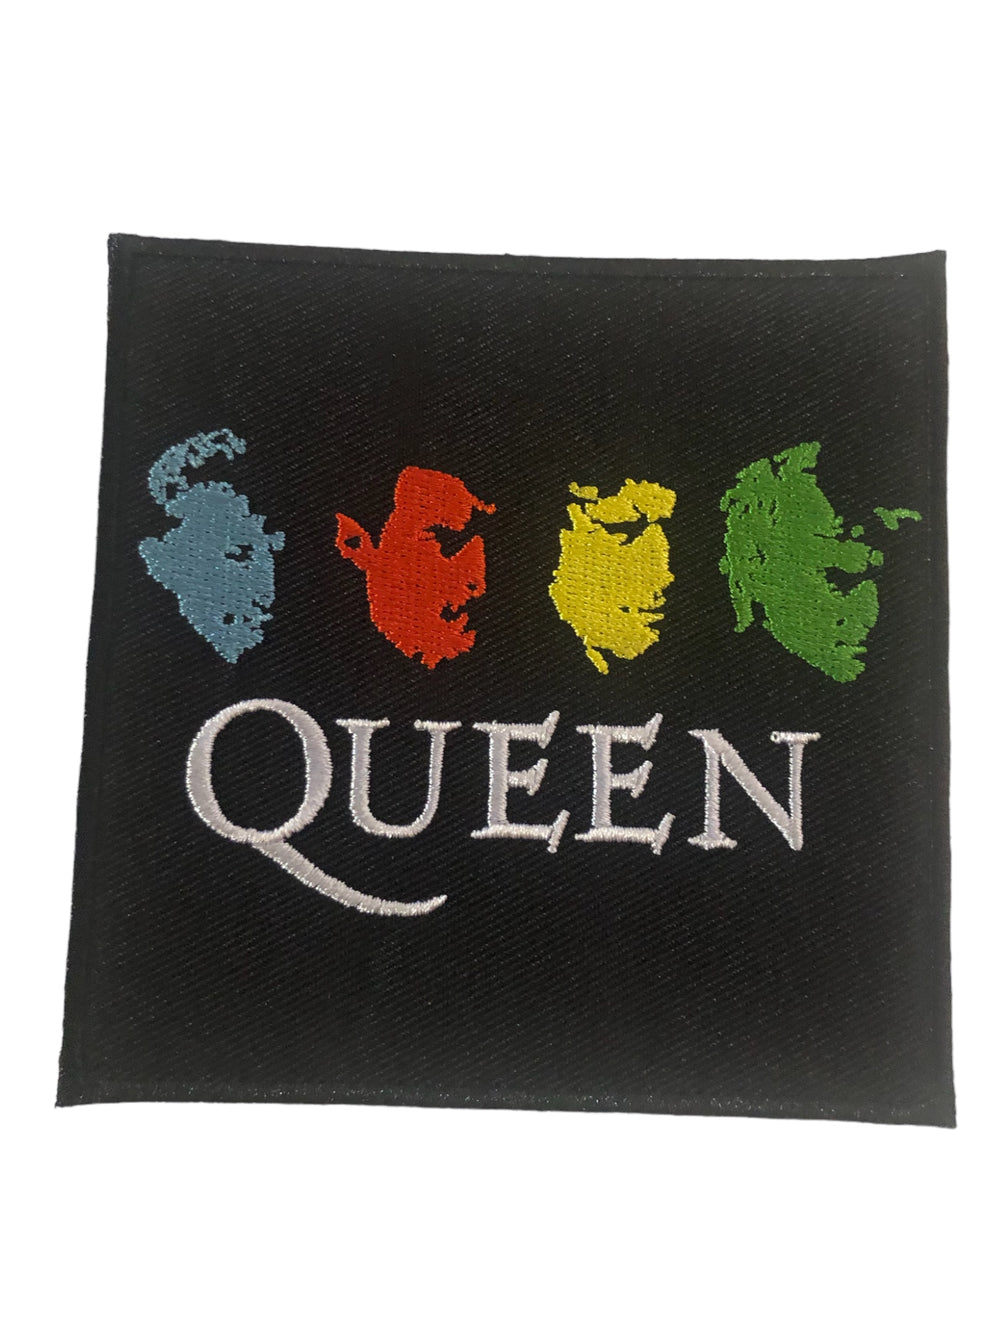 Queen Hot Space Tour Official Woven Patch Brand New